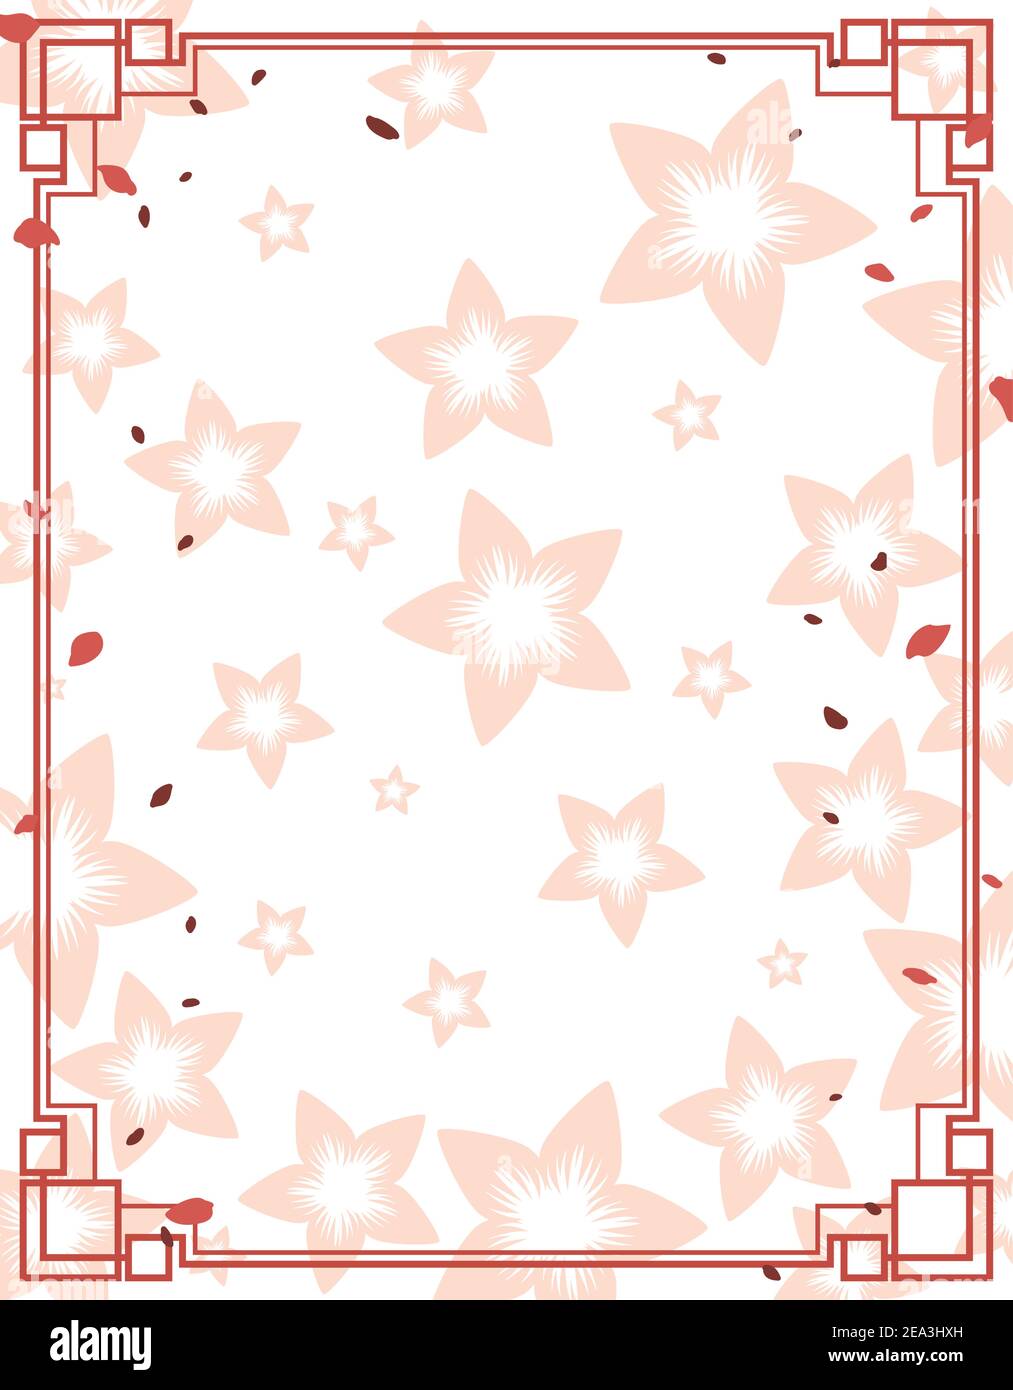 Template with frame in Chinese style, pink cherry flowers silhouettes and petals shower, over white background. Stock Vector